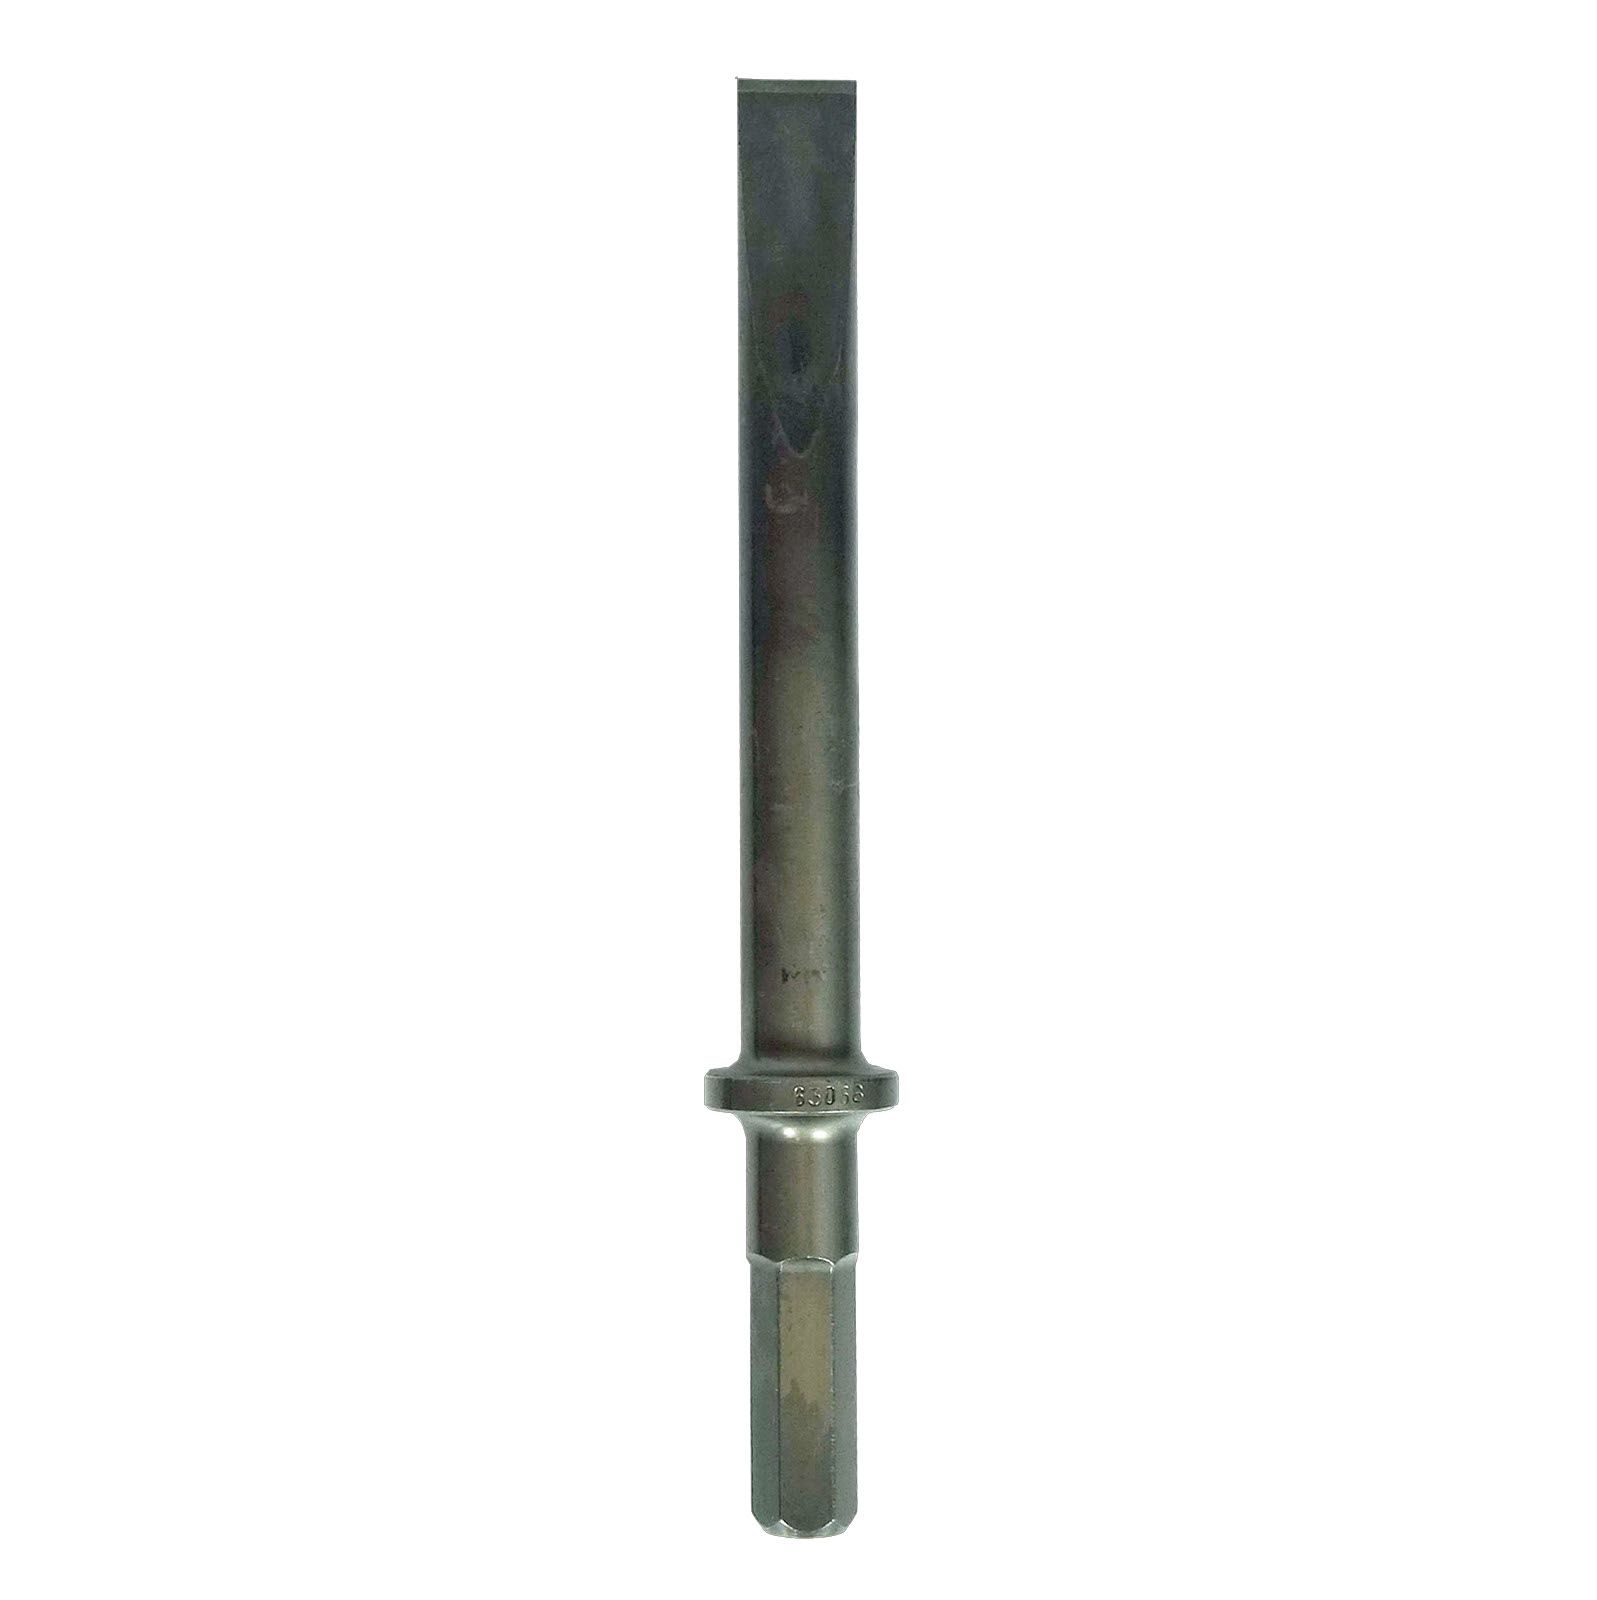 FLAT CHISEL SHANK HEX 12,5MM product photo